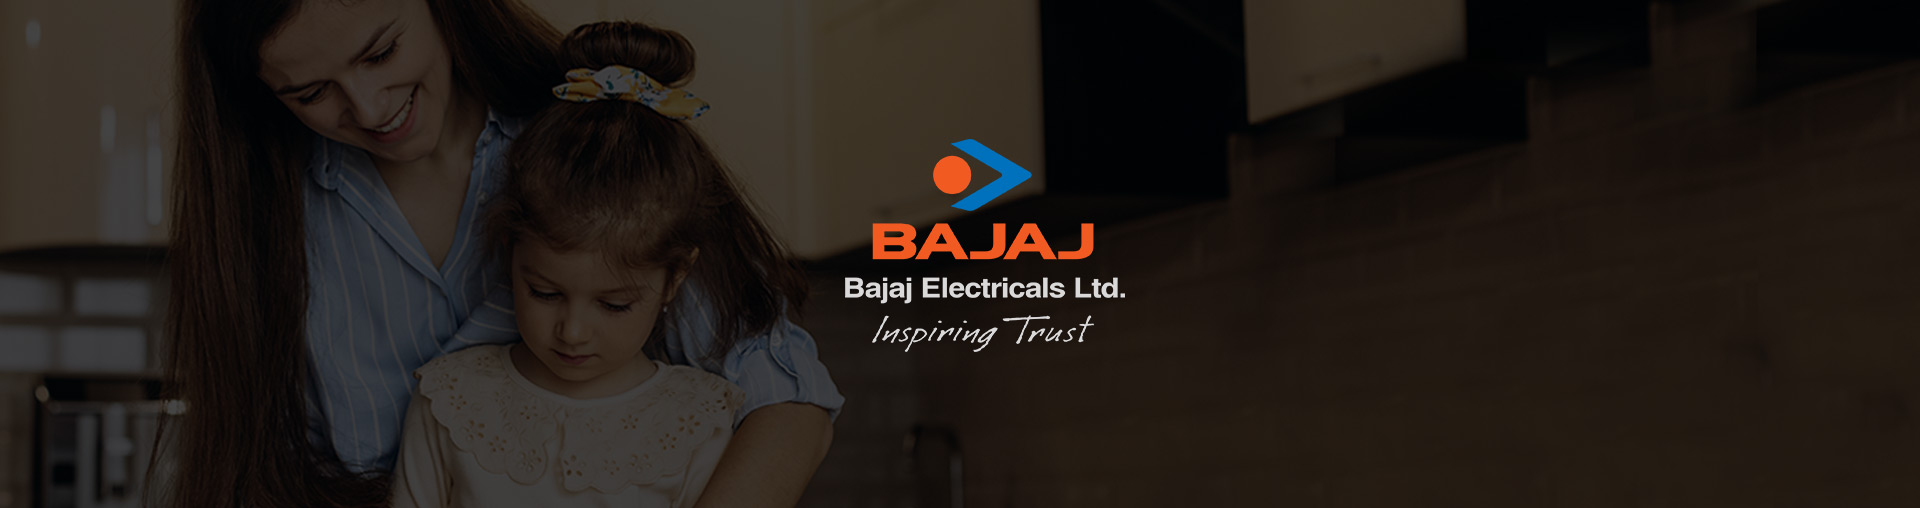 Karthik Sholay - Lead Advertising And Brand Management at Bajaj Electricals  Ltd | The Org